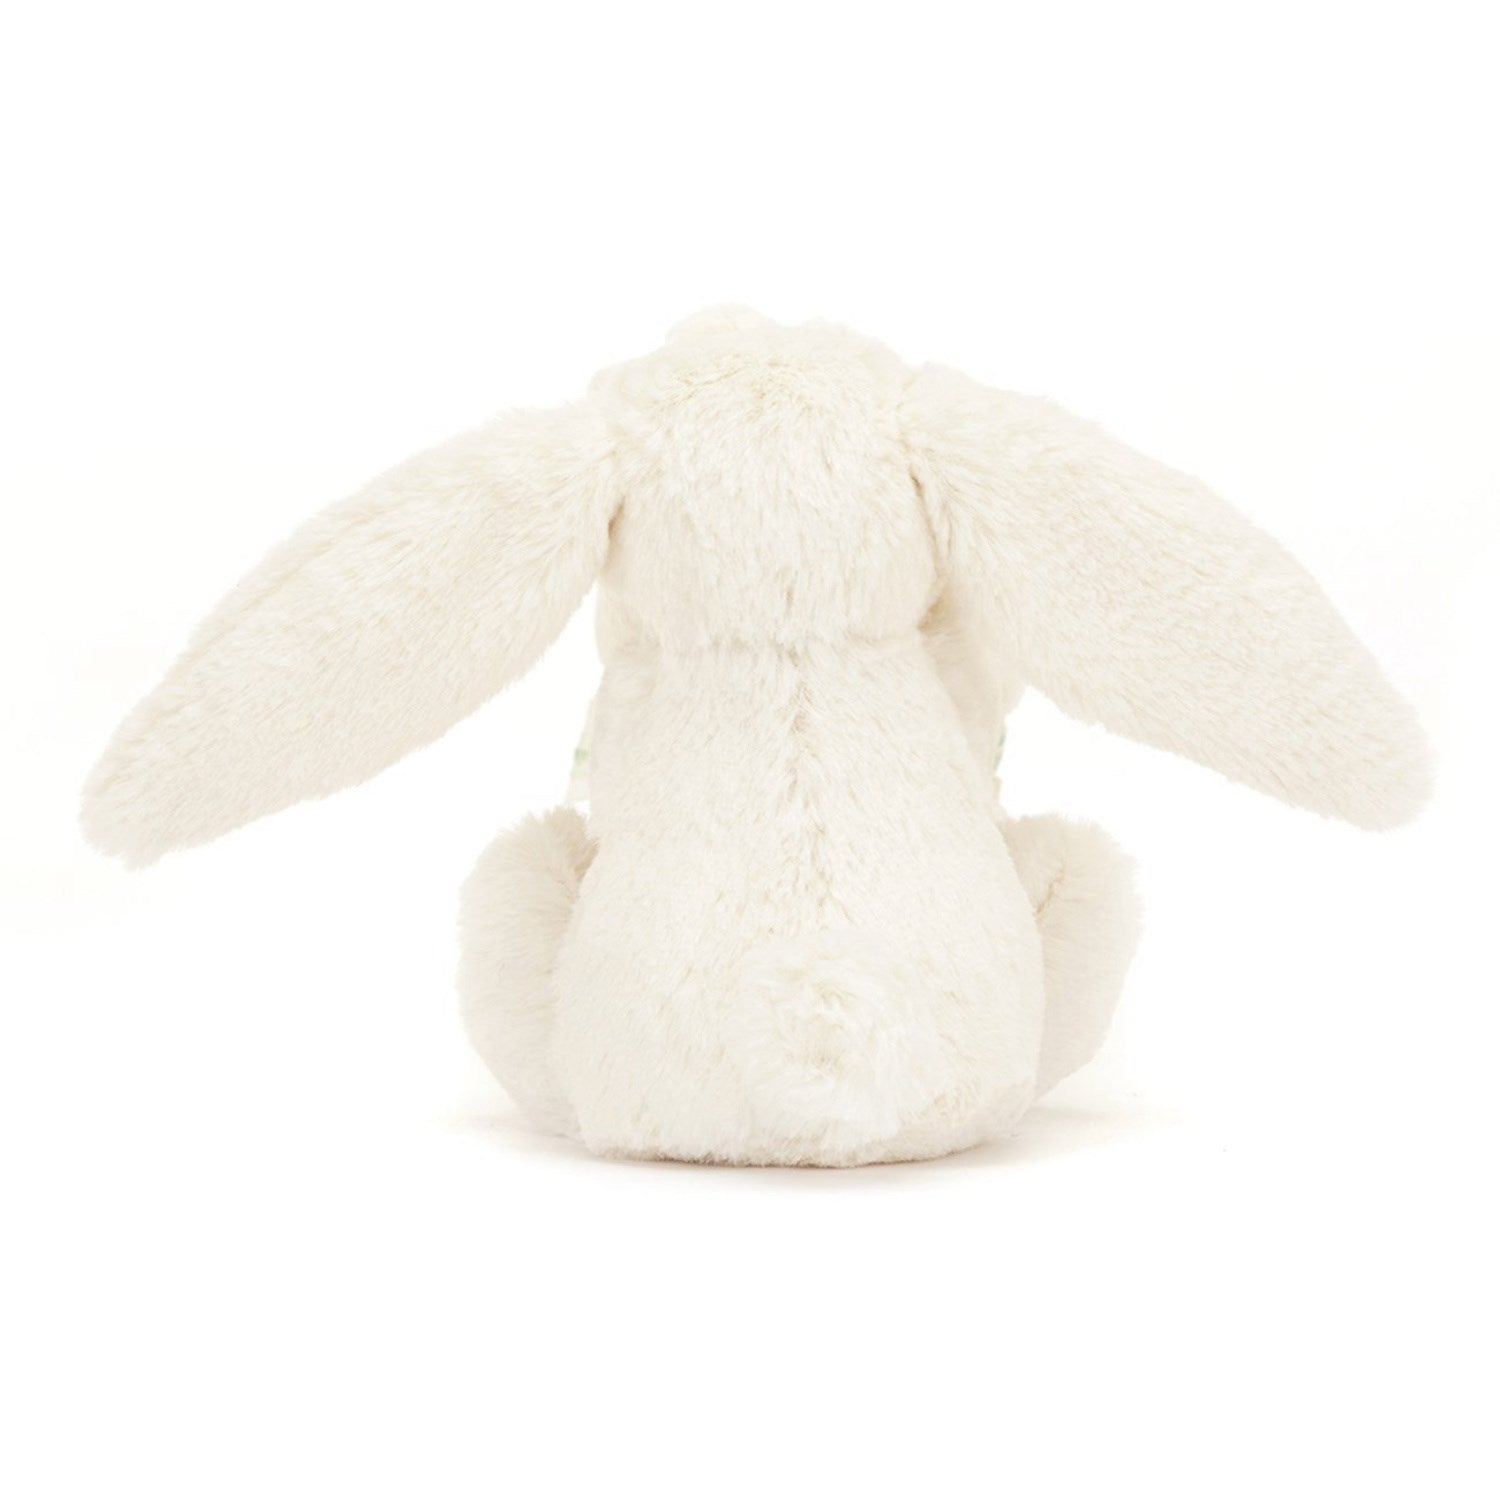 Jellycat Bashful Cream Bunny Soother 3